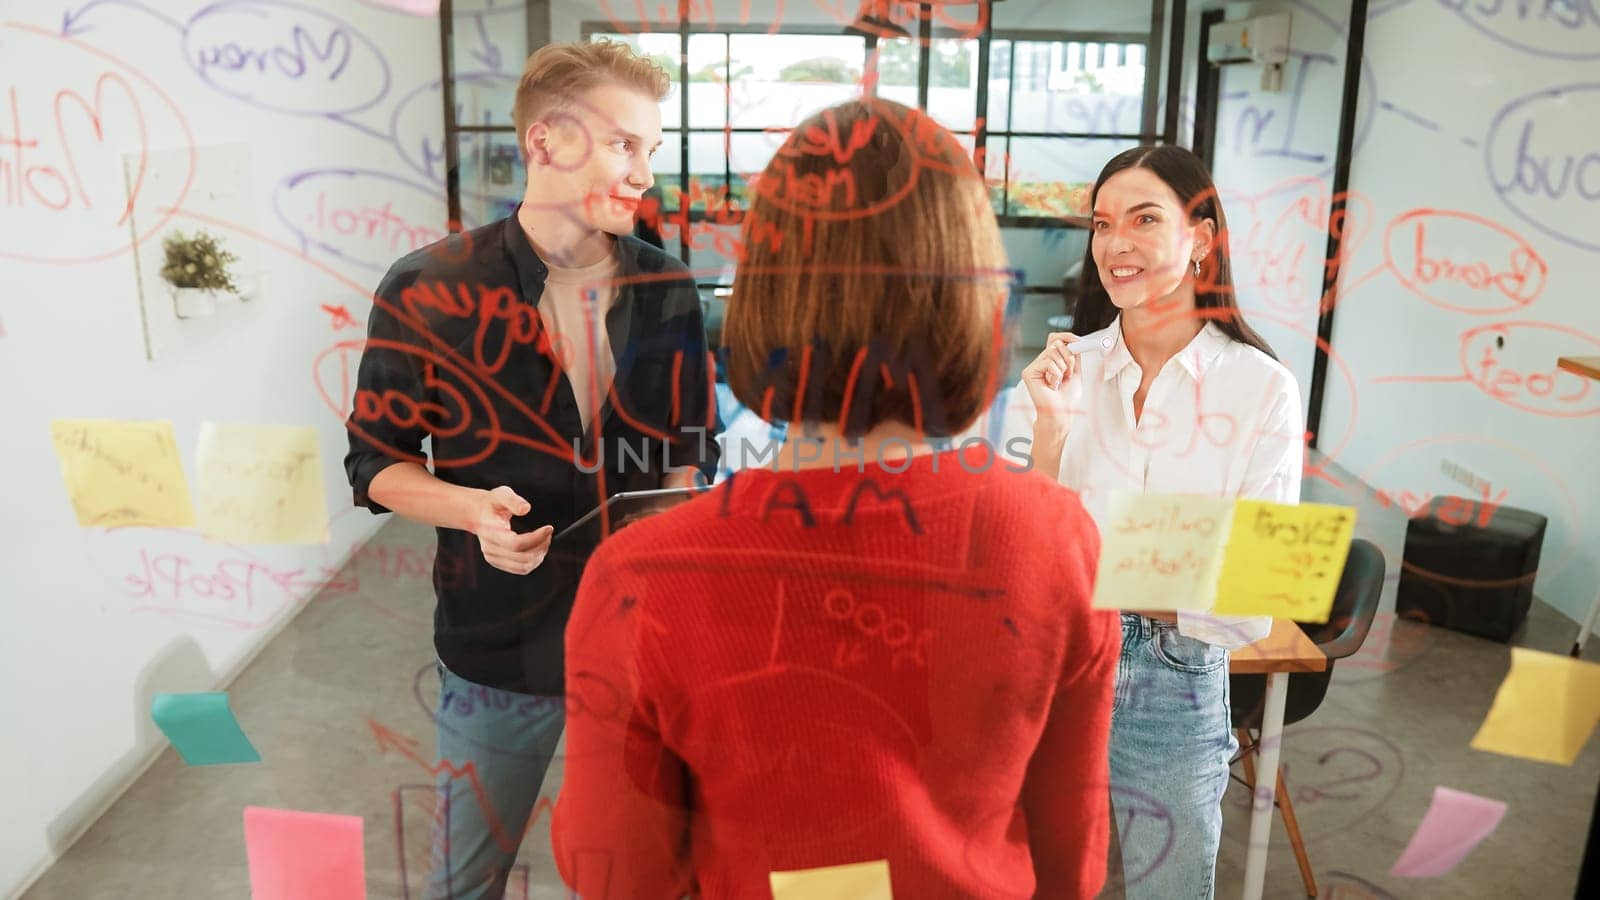 Creative start up team brainstorming marketing idea while cooperative caucasian businesswoman presents creative solution in front of glass board at business meeting. Working together. Immaculate.